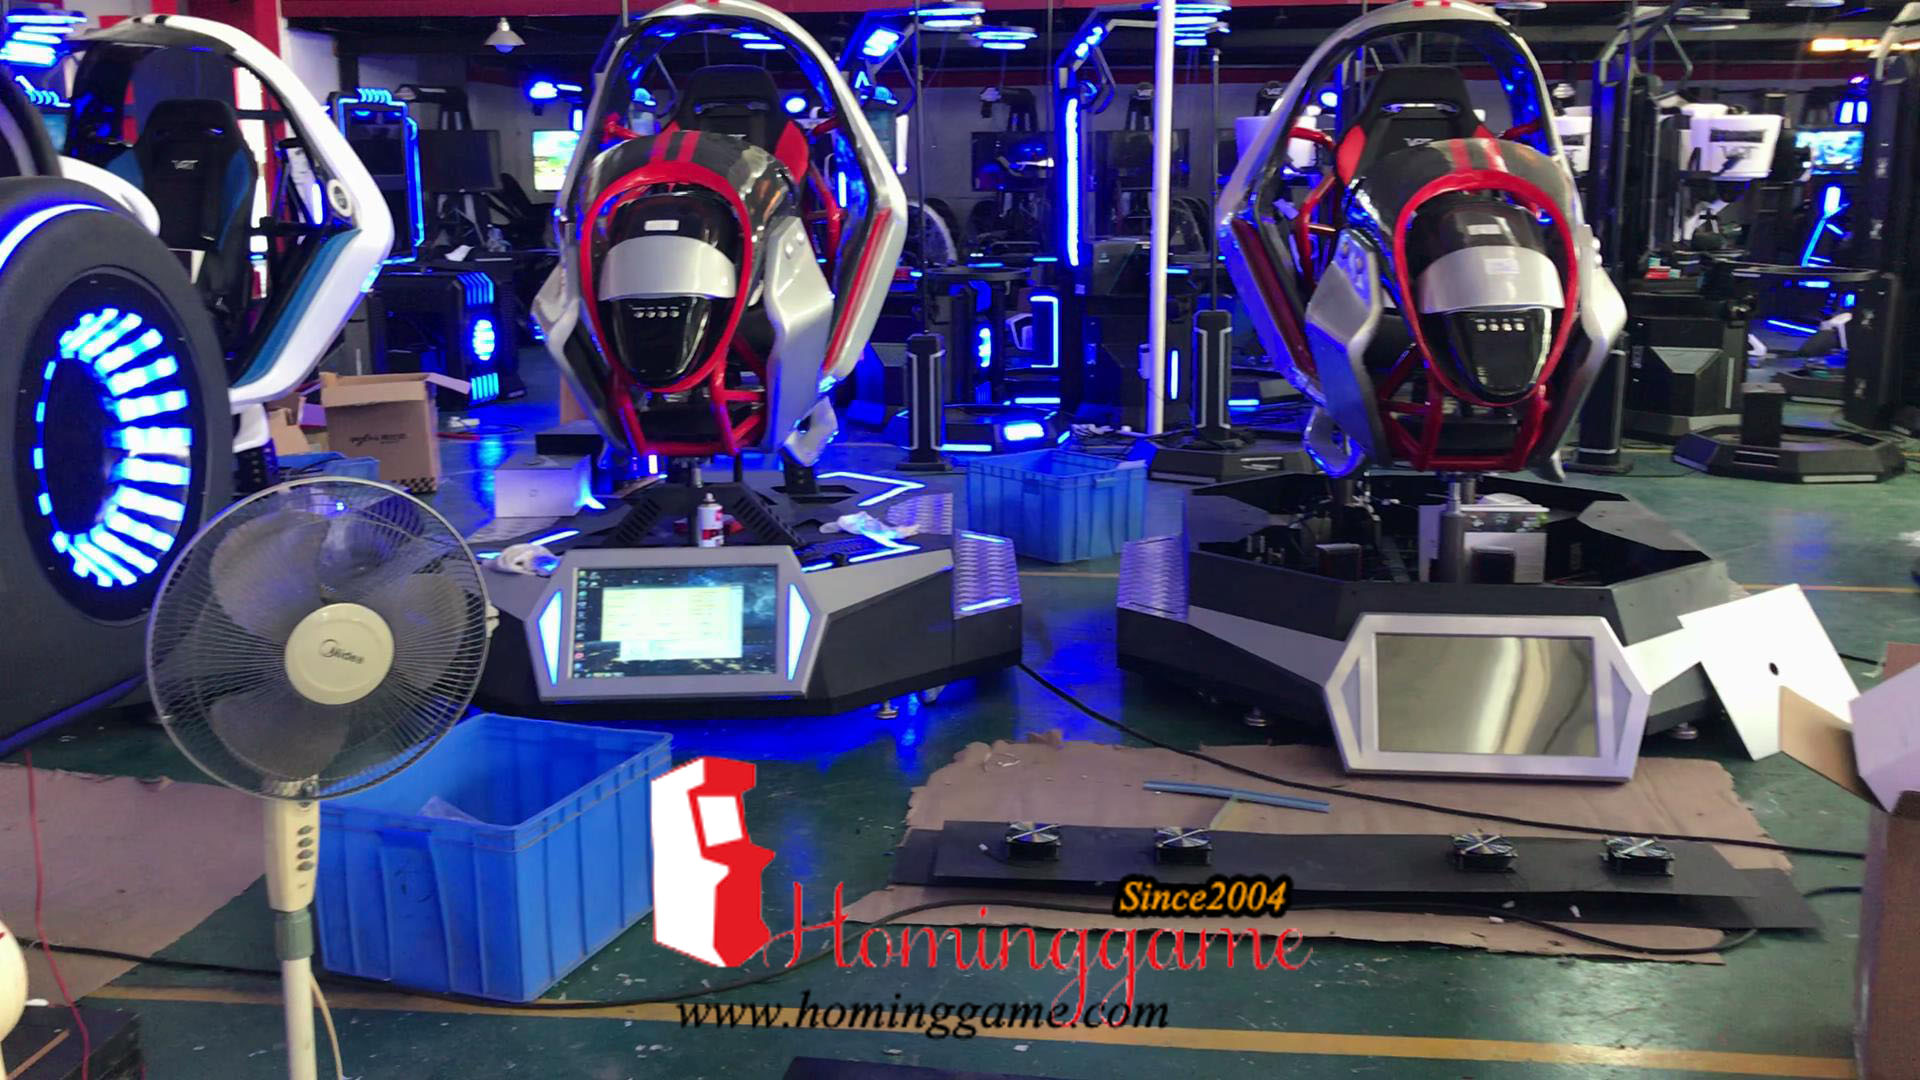 2018 Hot 3 Seats 9D VR Egss Reality Game Machine,2 Seats 9D VR Egg Reality Game Machine,9D VR Cinema Egg Game,9D VR game,VR Game,9D VR,VR game machine,9D VR cinema,9D VR theater,9D,9D Machine,VR Egg,Single VR egg,Double 9D VR egg, 3 Player 9D VR egg,9D VR Bike,9D VR 6 seats Theater,6 seats VR theater,9D Cinema,9D racing Car Game Machine,9D VR gun shooting game machine,9D VR airplane,9D VR simulator game machine,Game Machine,Arcade Game Machine,Coin Operated Game Machine,Amusement park game machine,Simulator game machine,Indoor game machine,Family Entertainment,Entertainment game machine